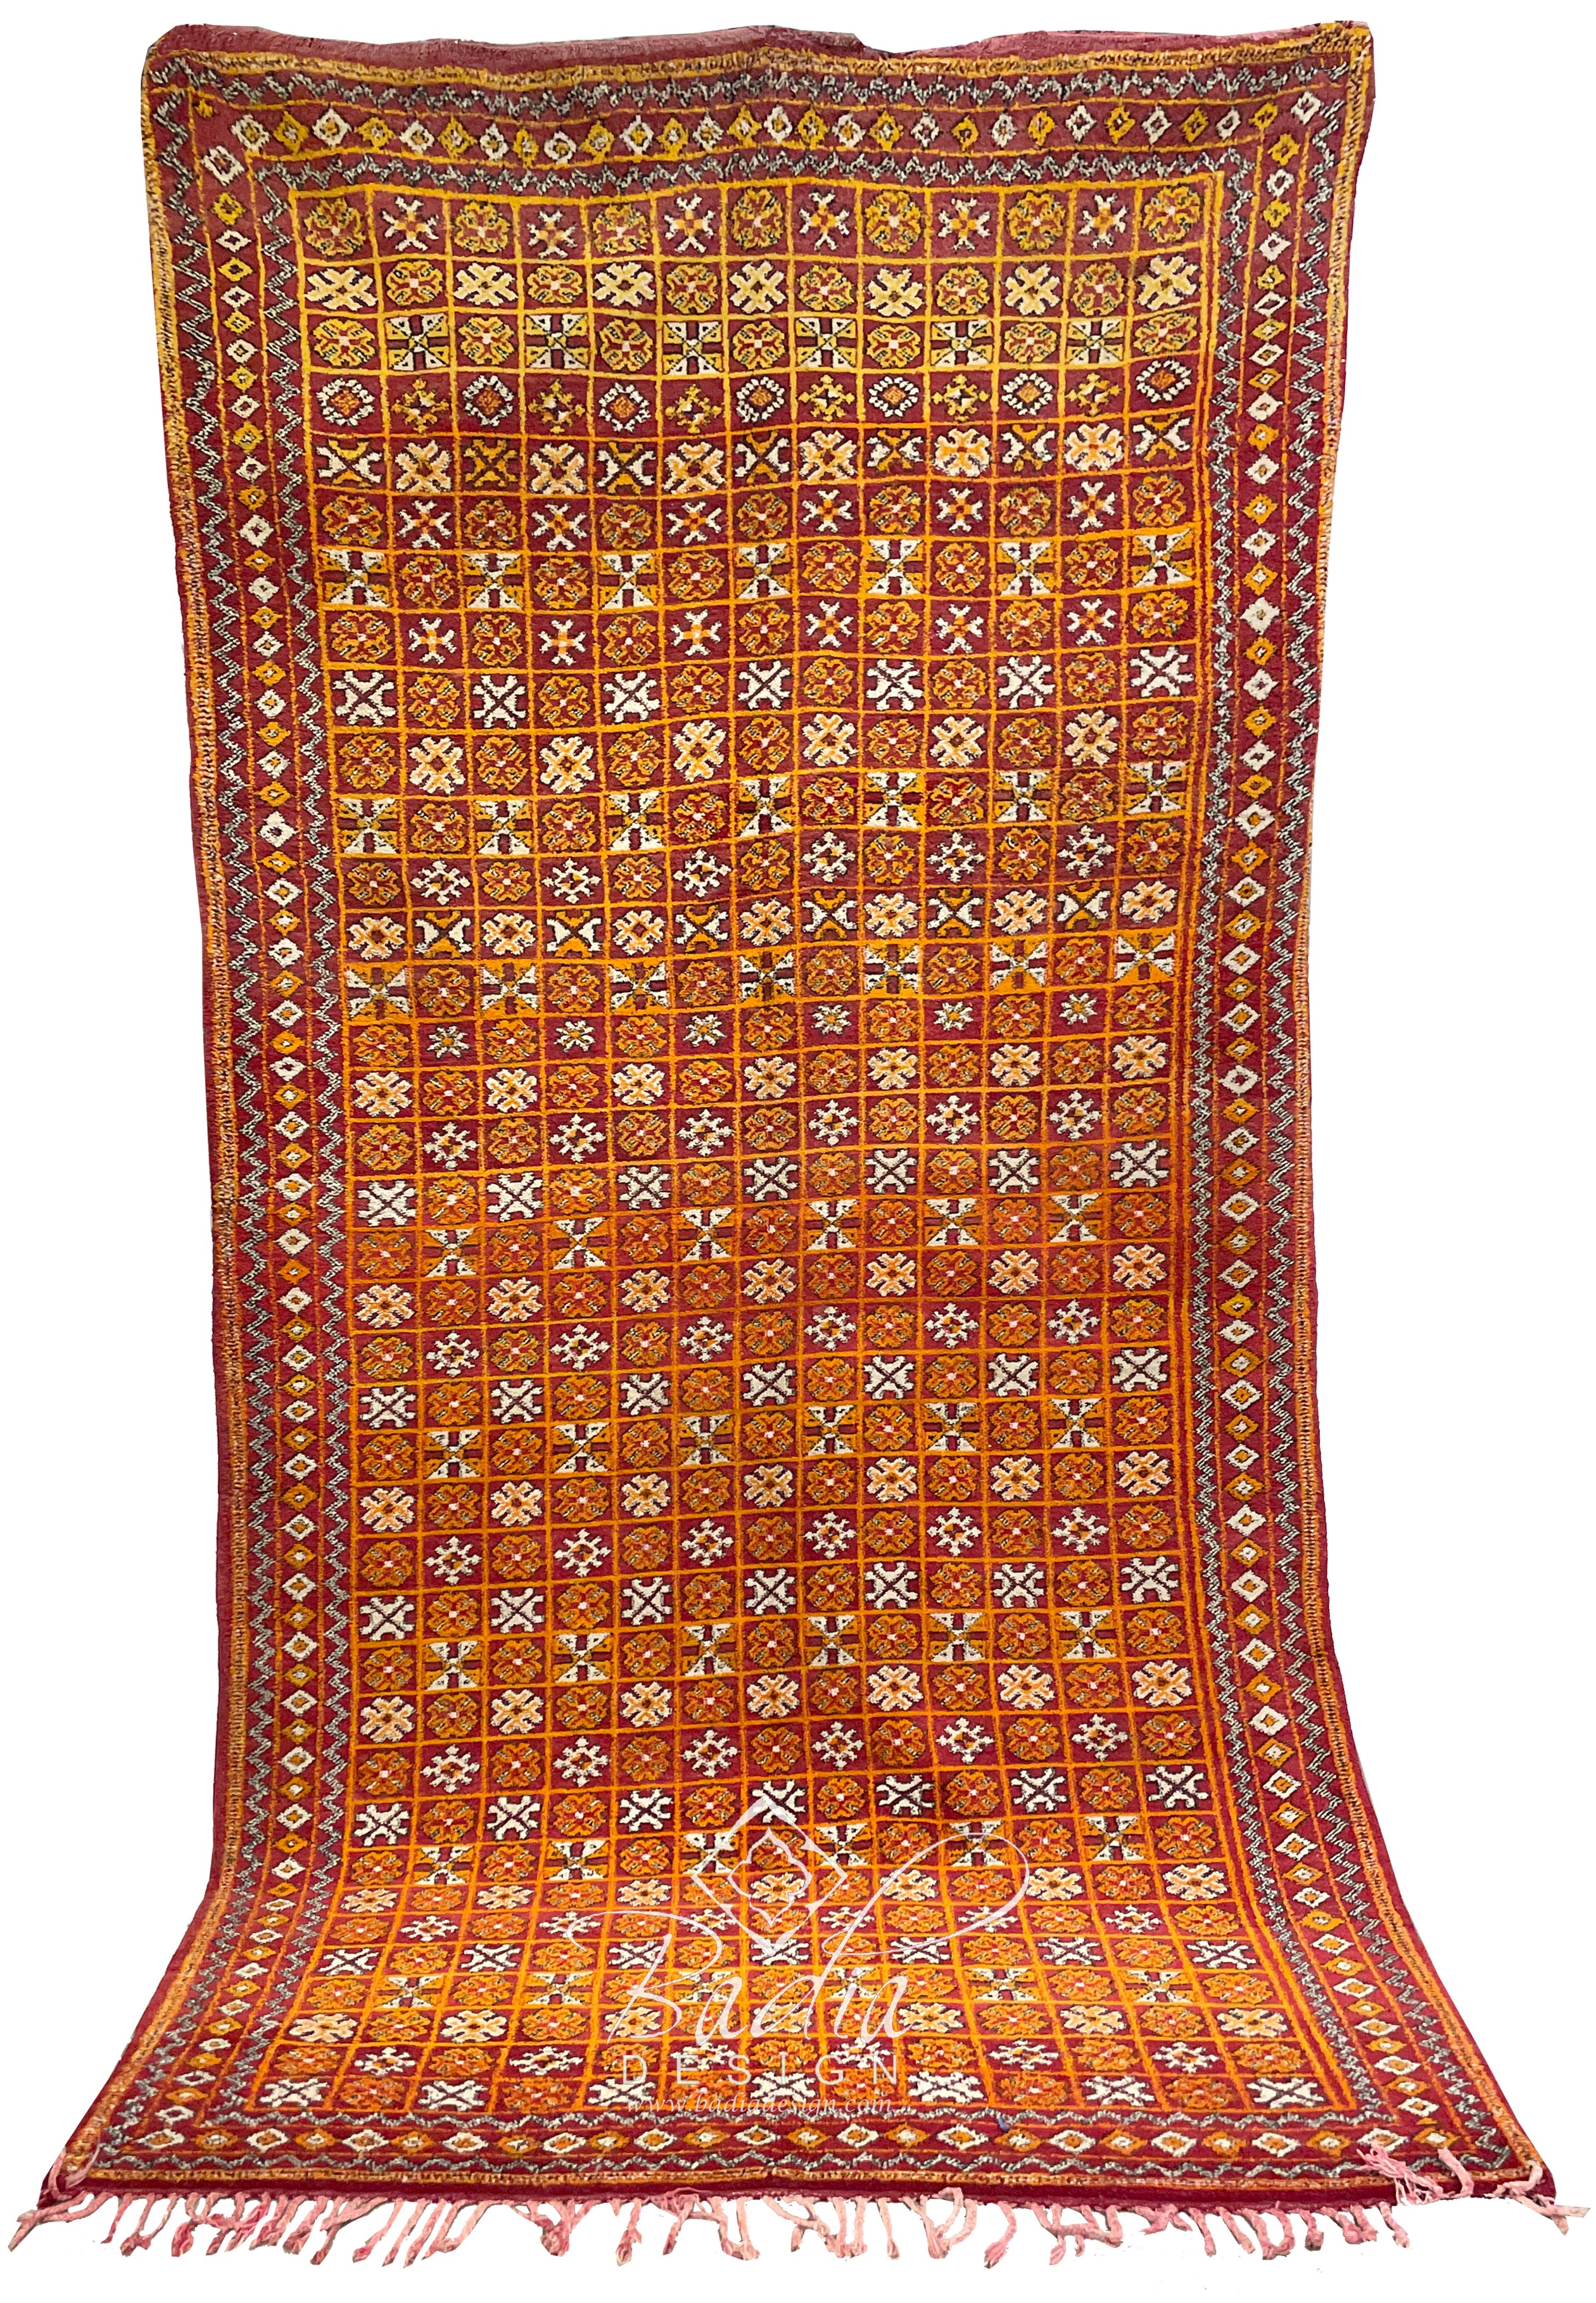 large-authentic-handmade-moroccan-beni-ourain-rug-r029.jpg